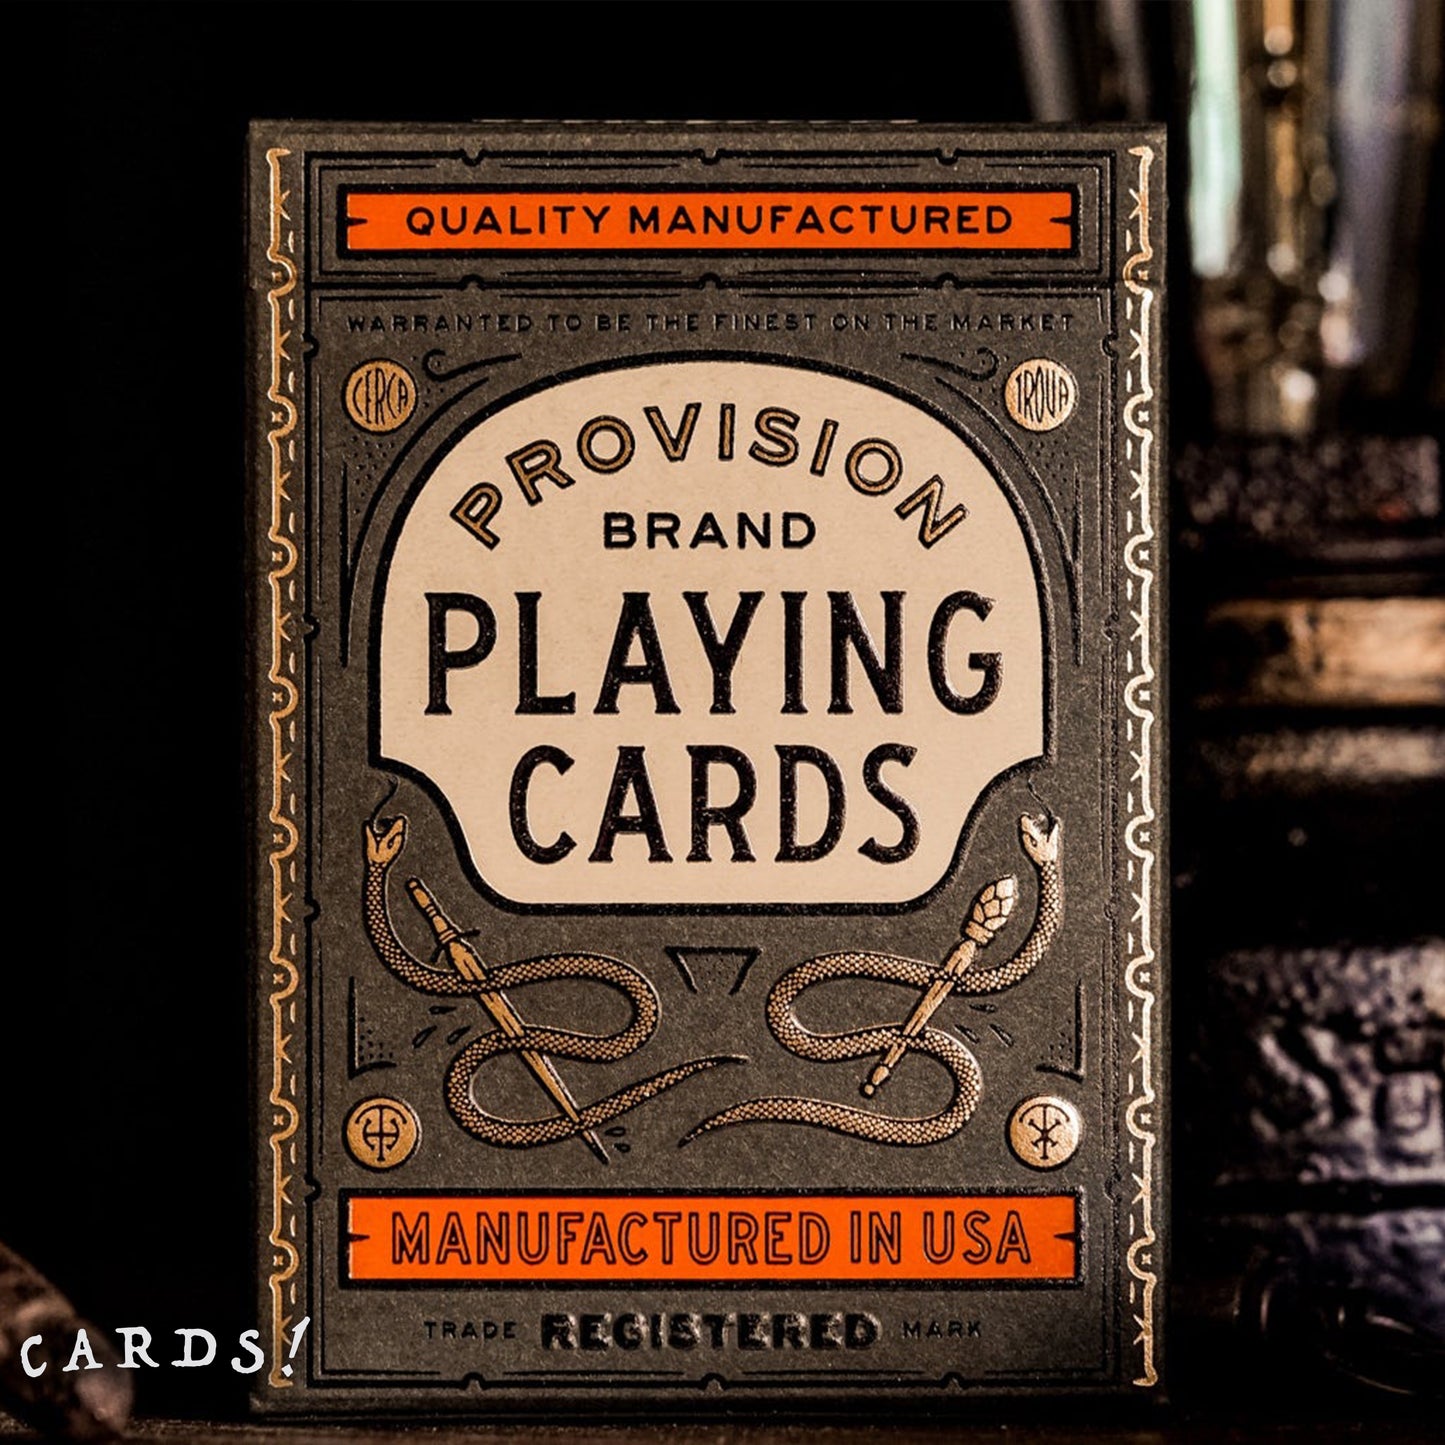 Provision Playing Cards